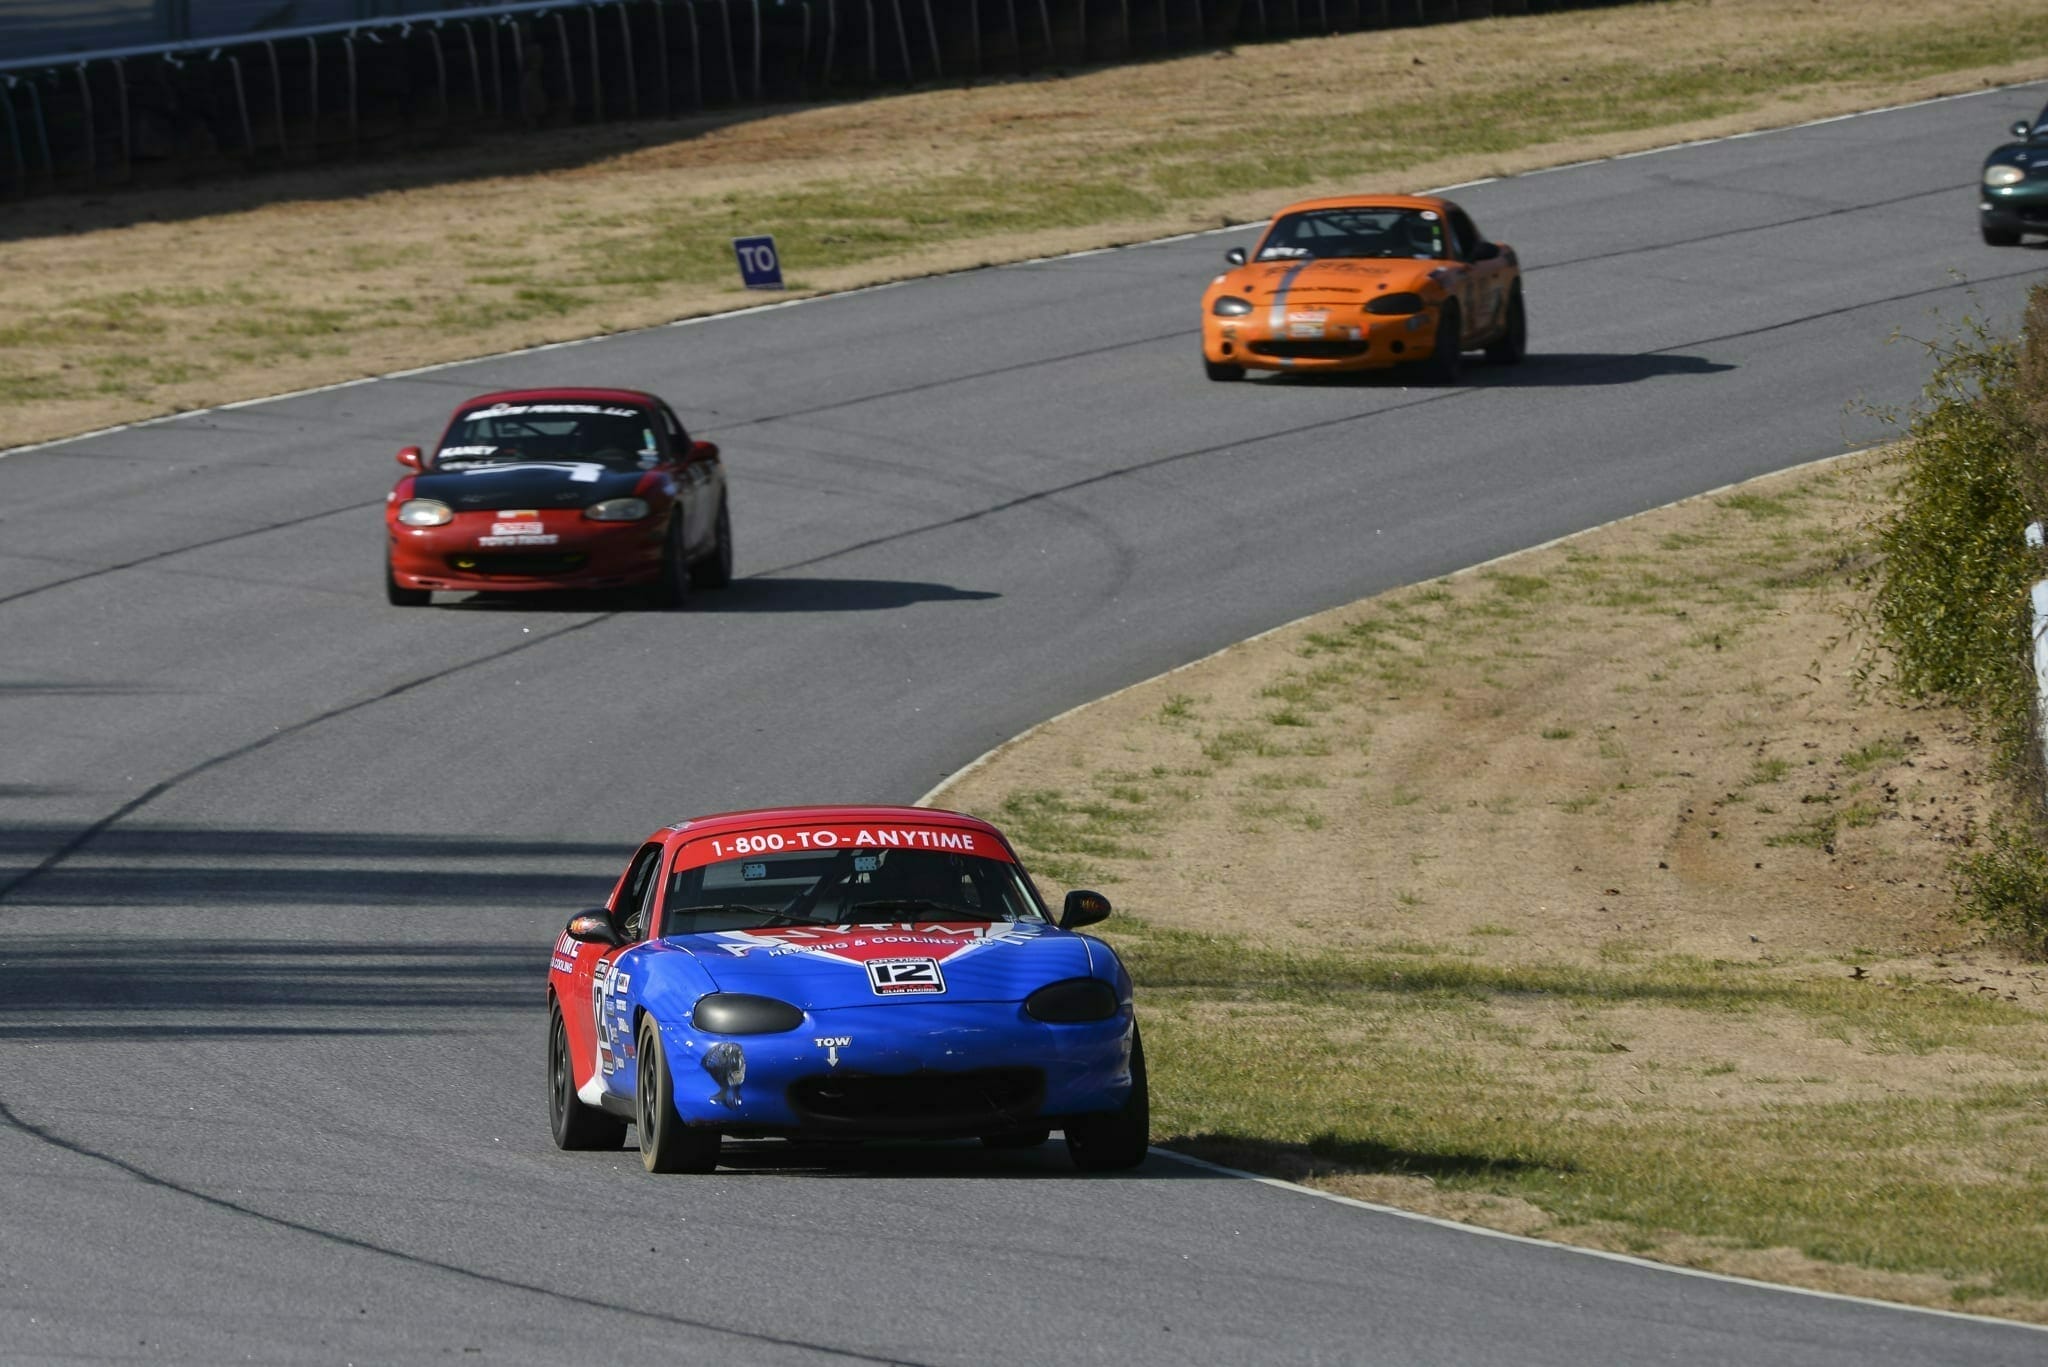 MemberRace January 2 - The AMP Car Championship Series returns this March